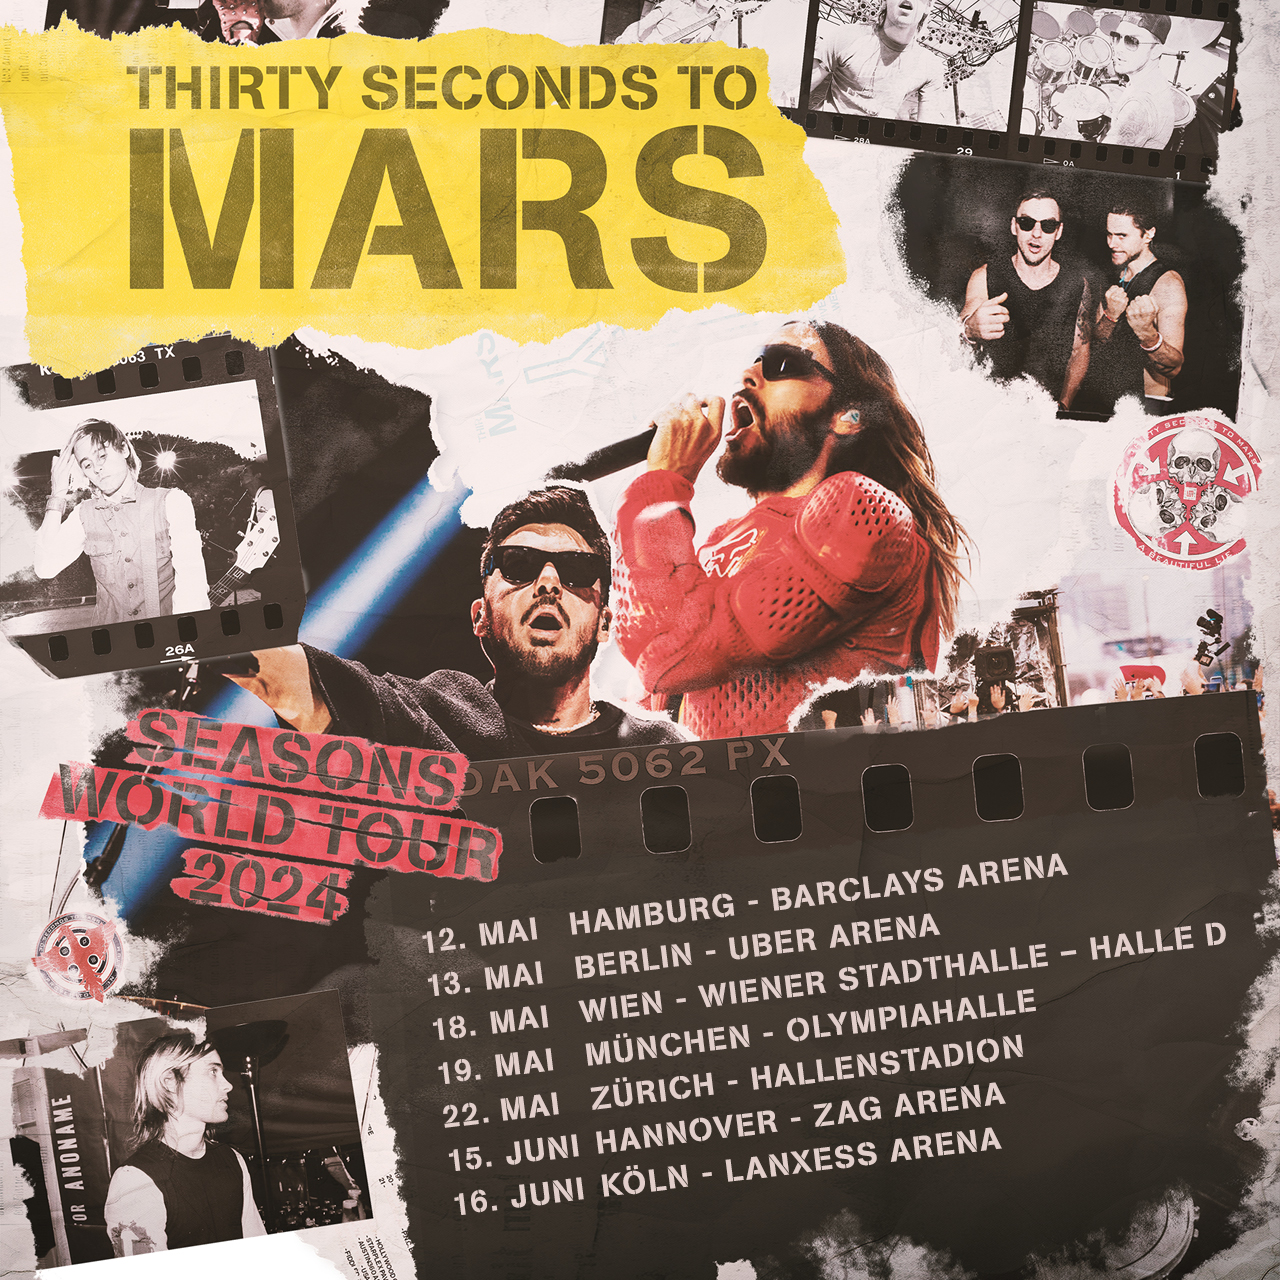 Billets Thirty Seconds to Mars (Barclays Arena - Hambourg)